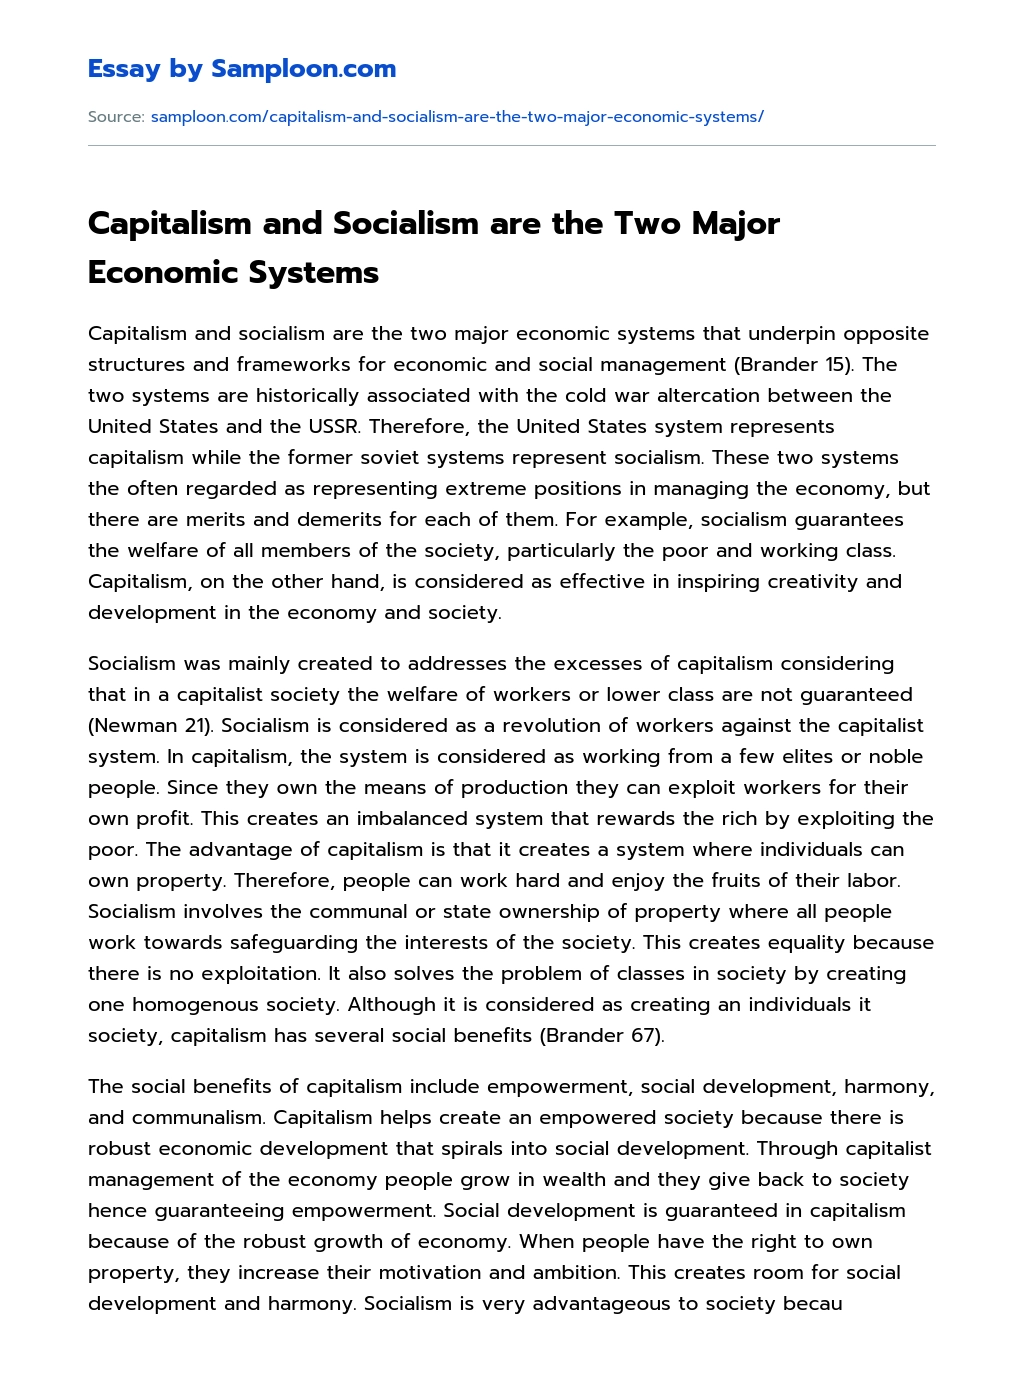 Capitalism and Socialism are the Two Major Economic Systems essay